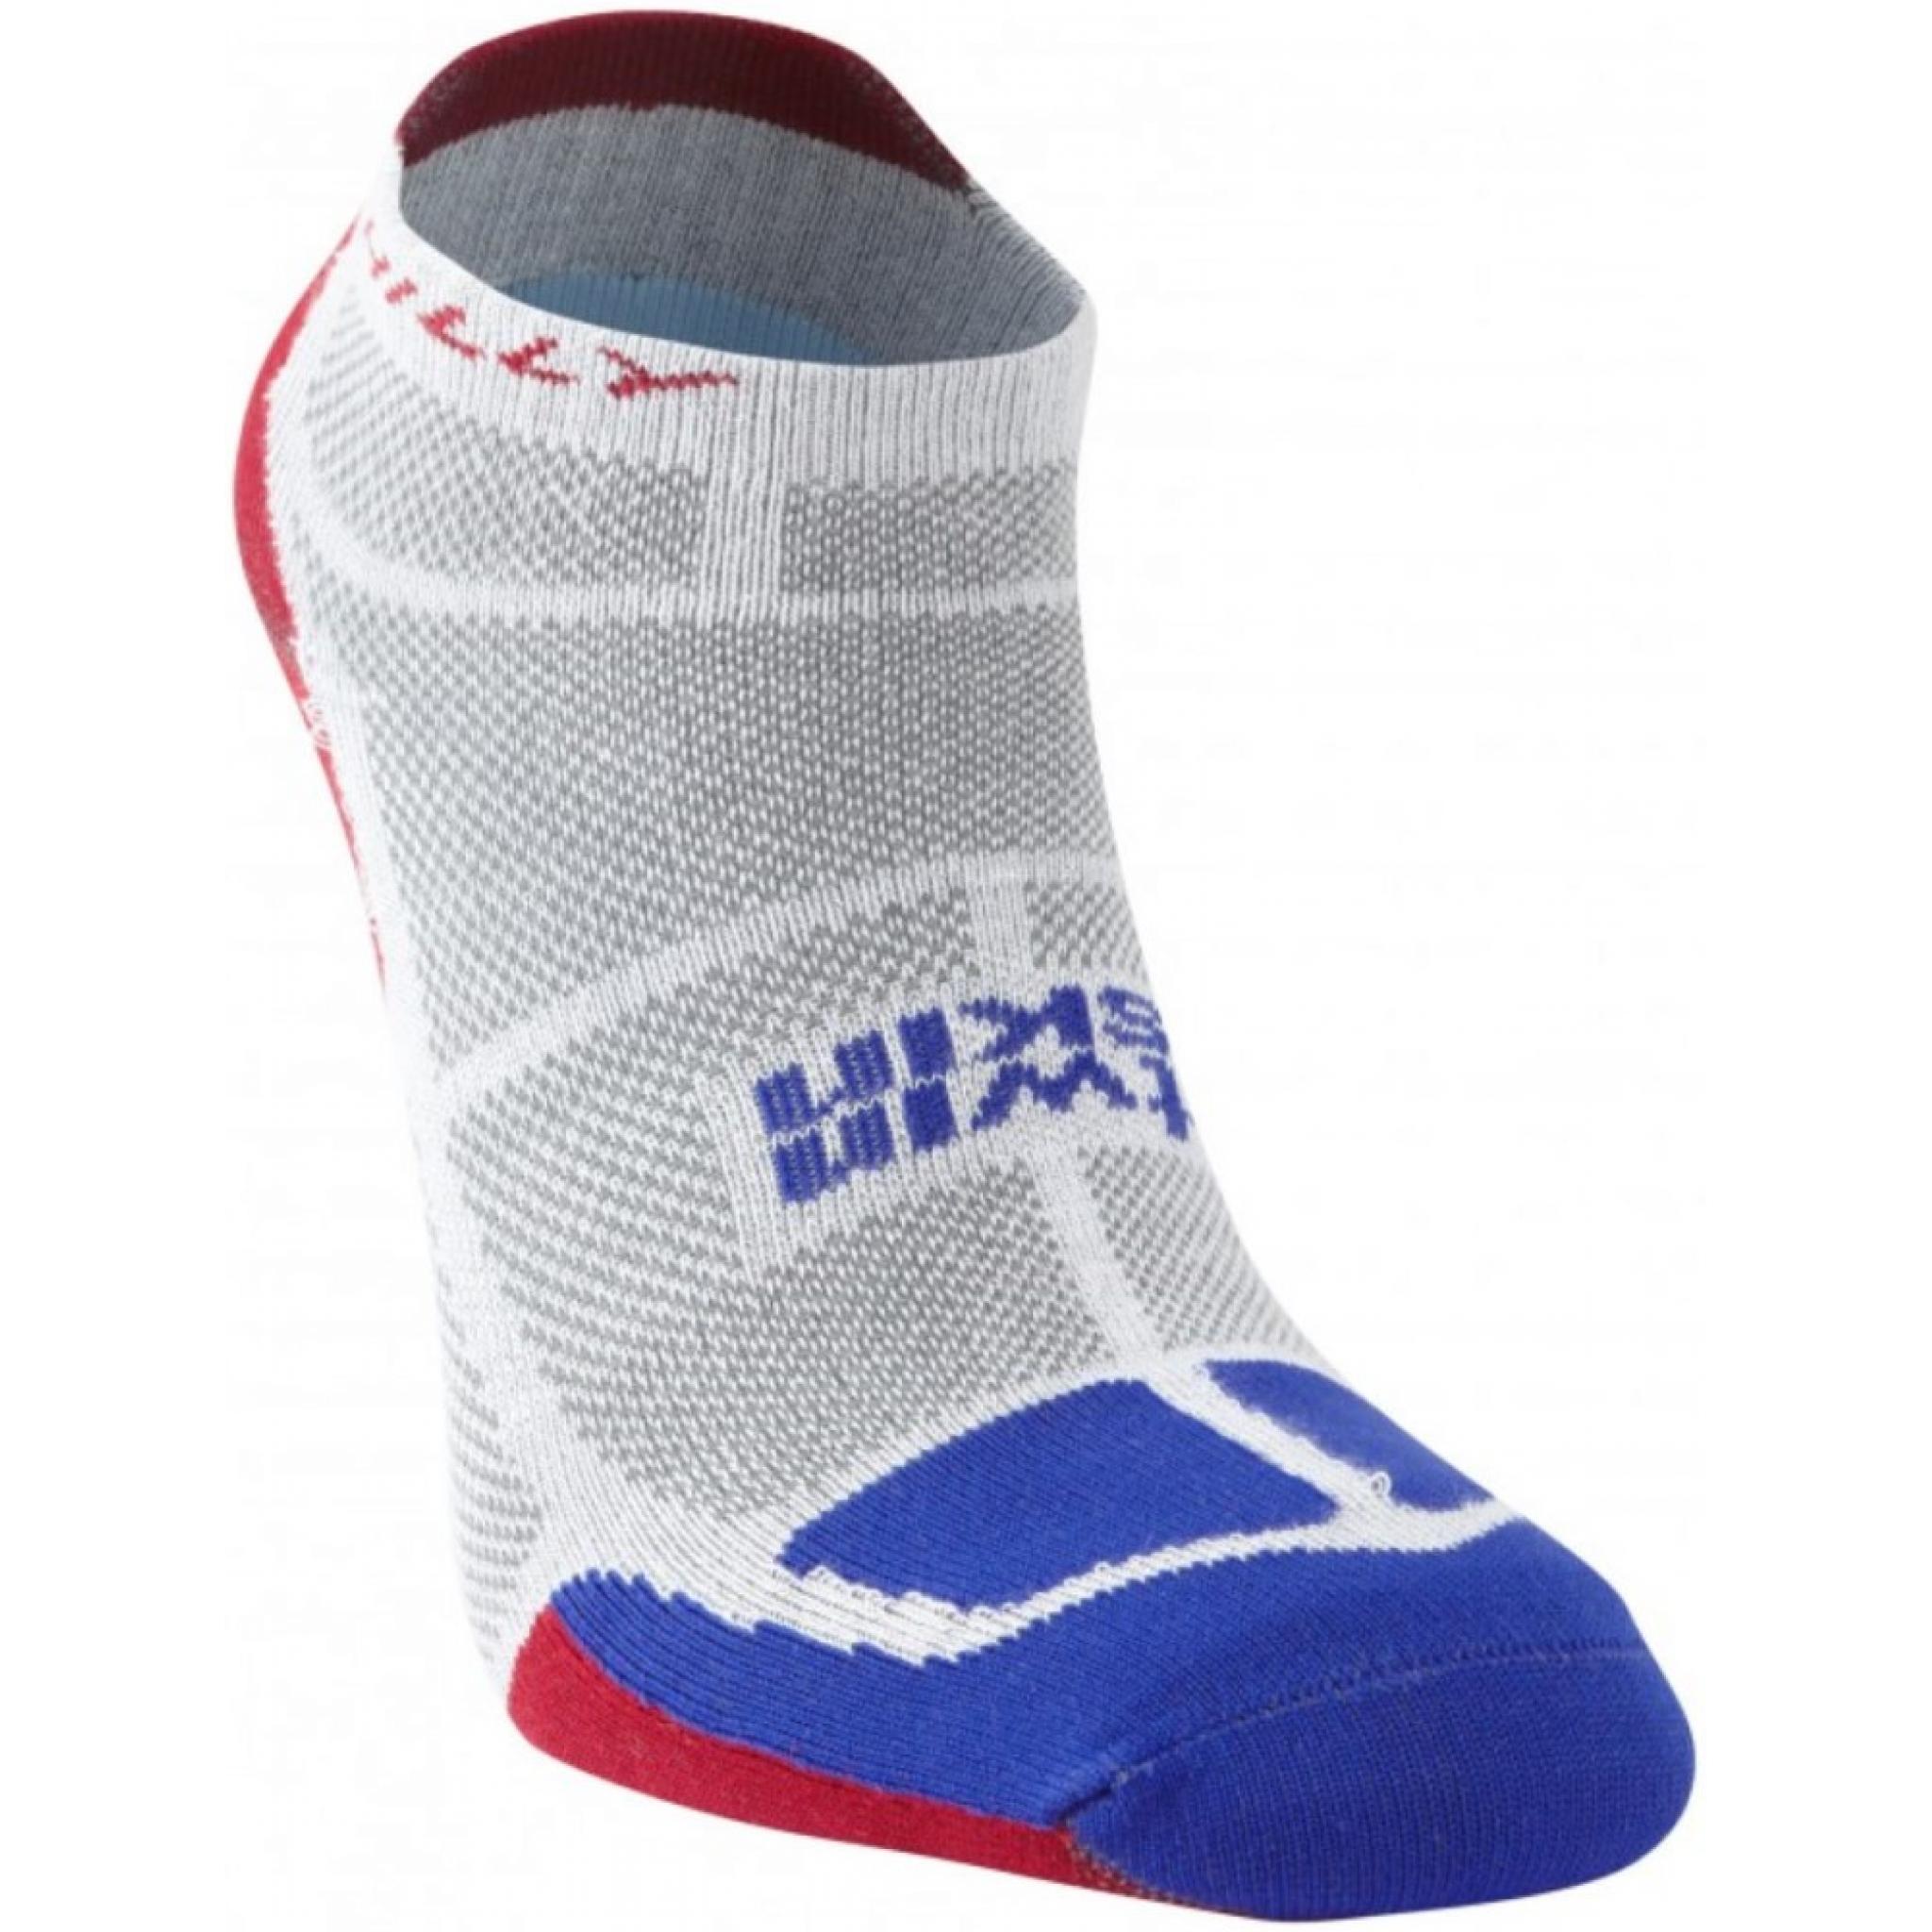 Hilly Mens Twin Skin Socklet Sports 